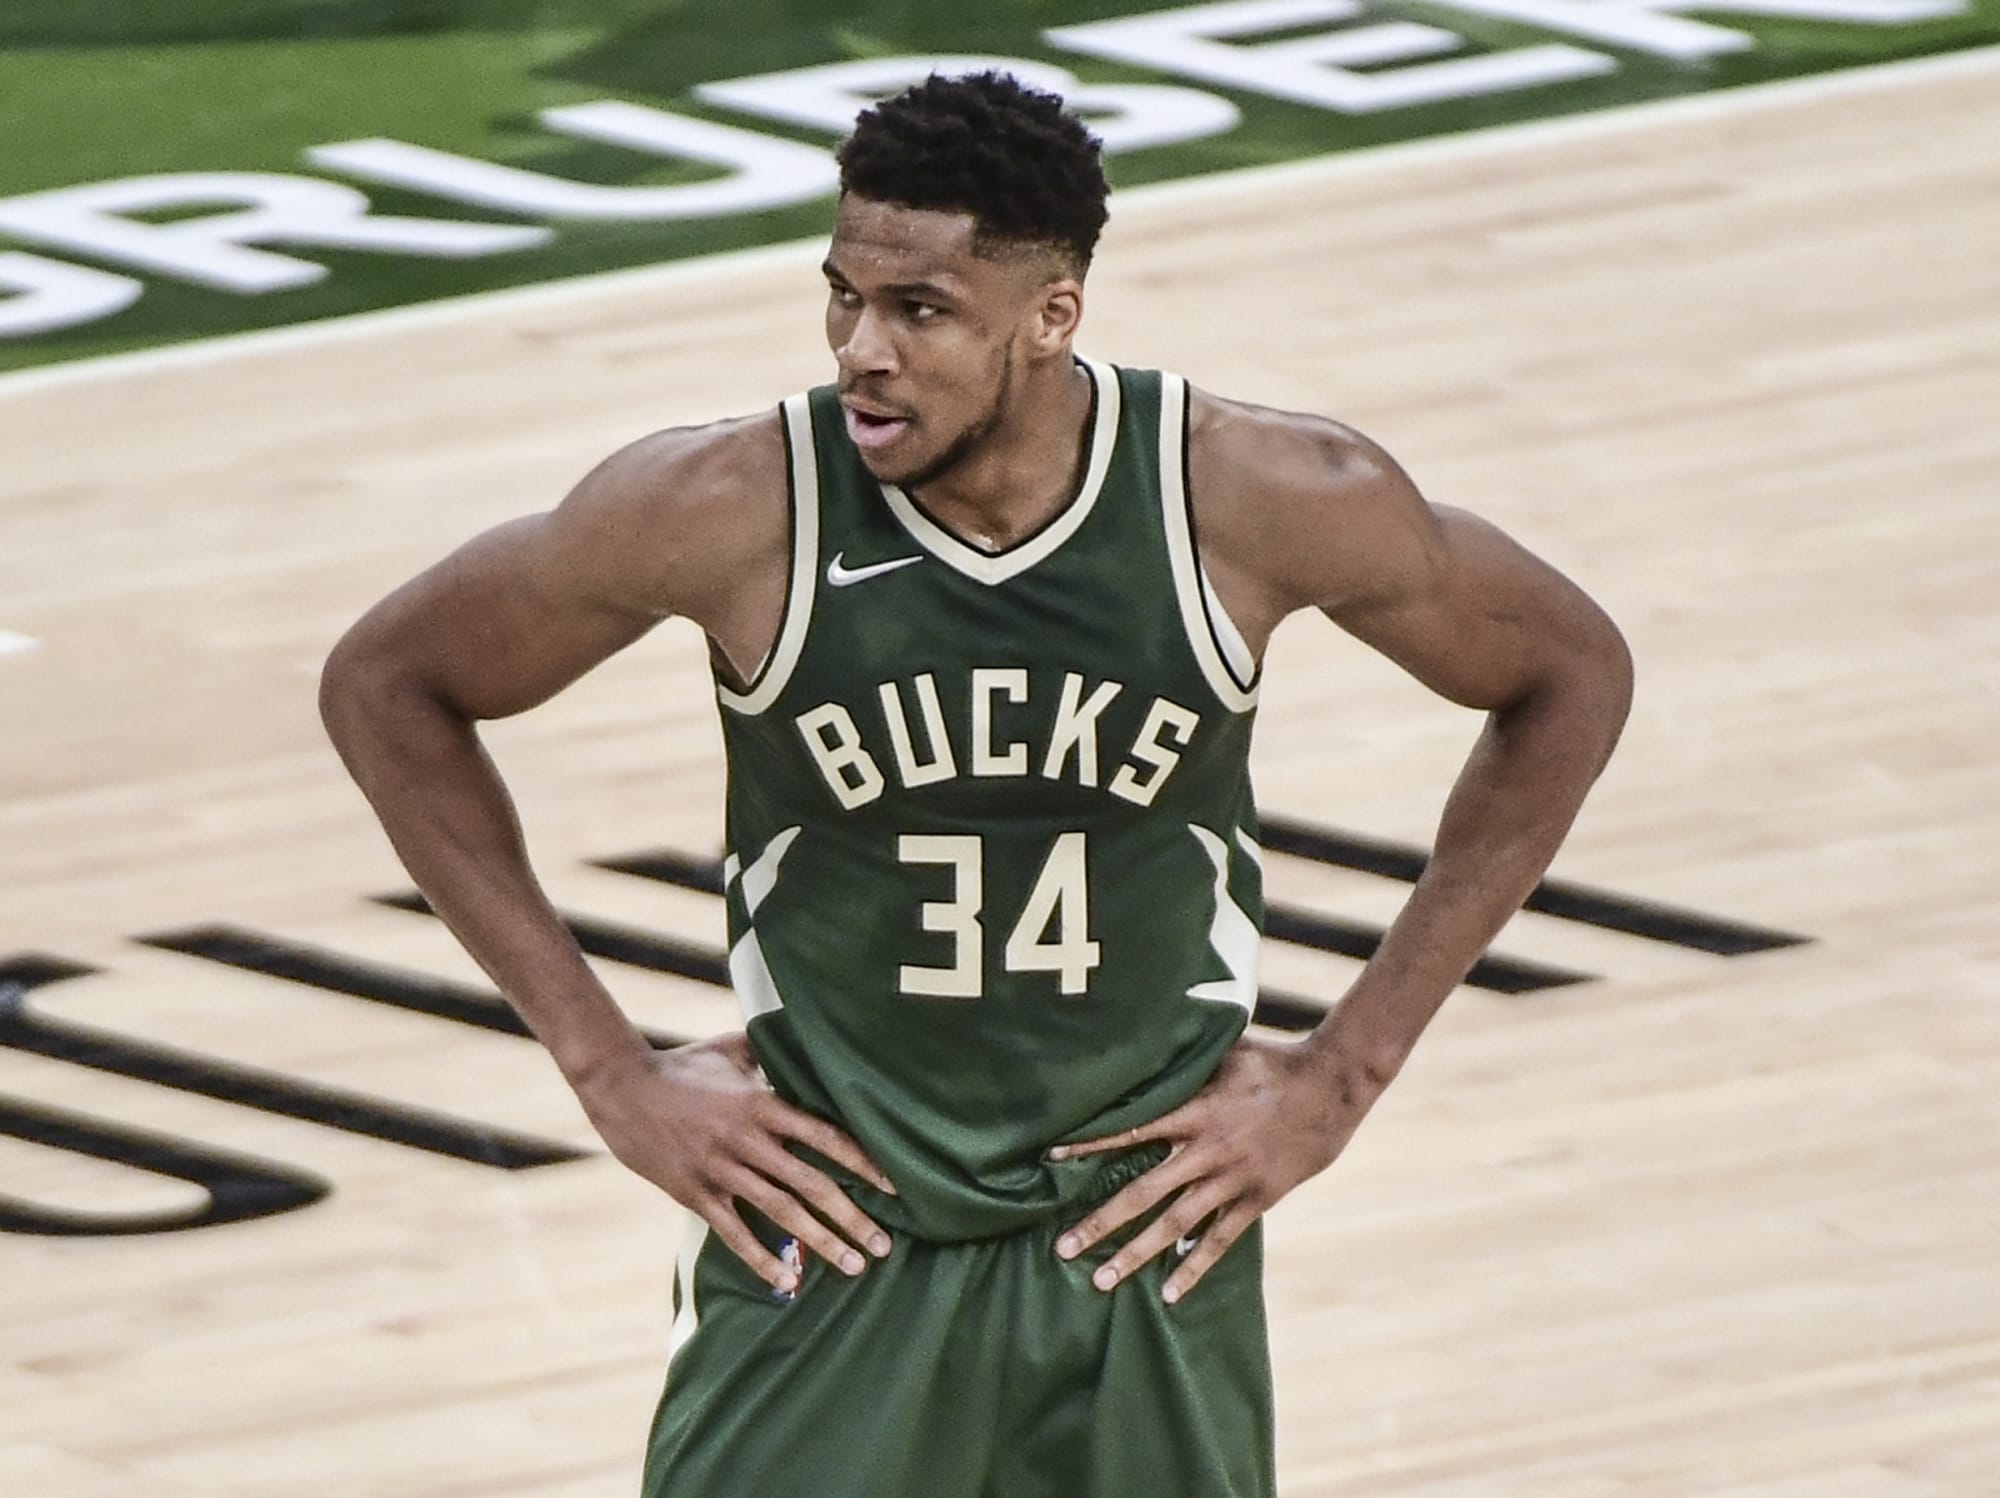 Aw freak out! NBA star Giannis Antetokounmpo film in the works at